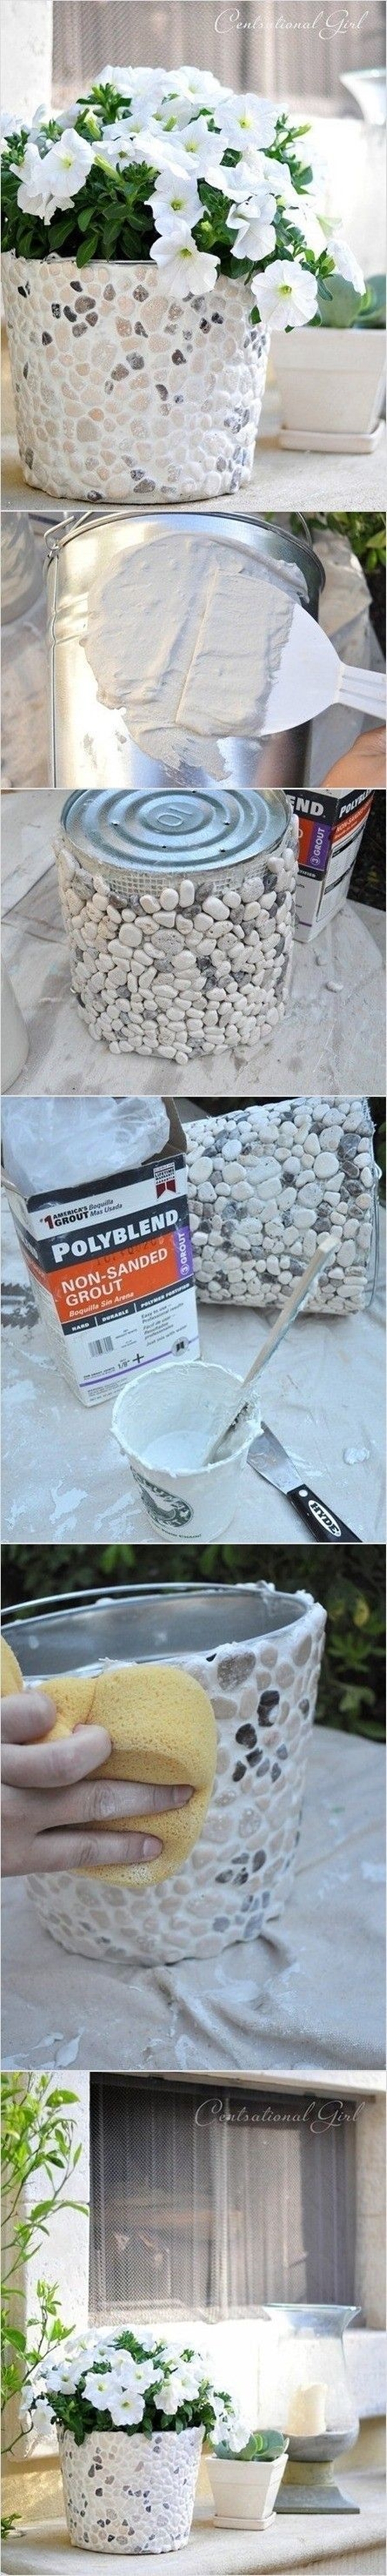 Cool Ways to Use STONE For DIY Projects in 2016 - 1